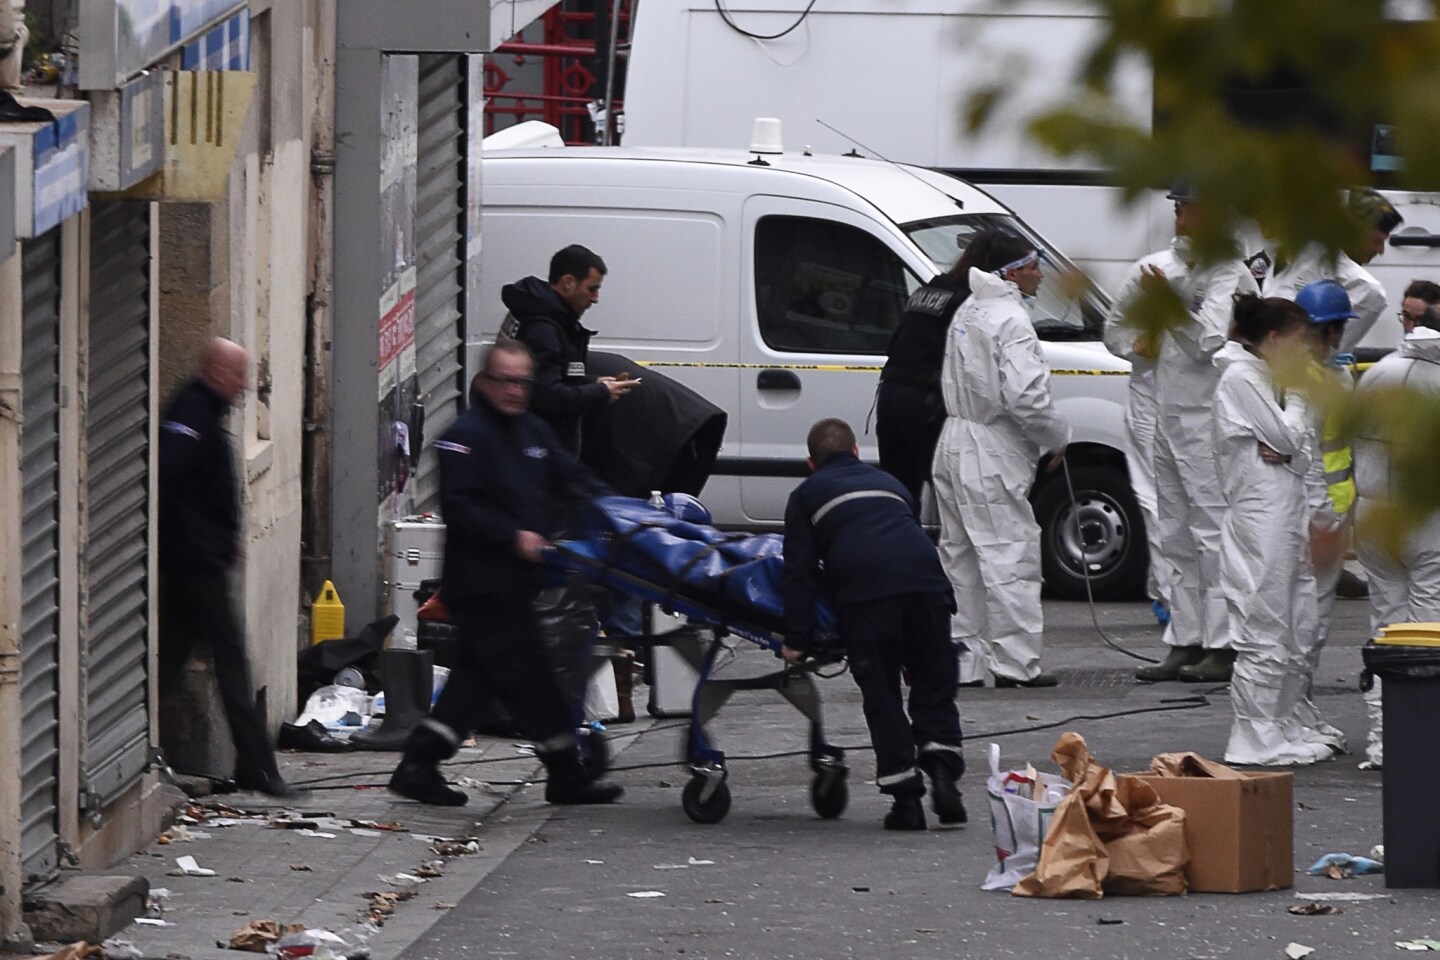 A body is removed from the apartment raided by French Police special forces earlier in the northern Paris suburb of Saint-Denis, searching those behind the attacks that claimed 129 lives in the French capital five days ago.